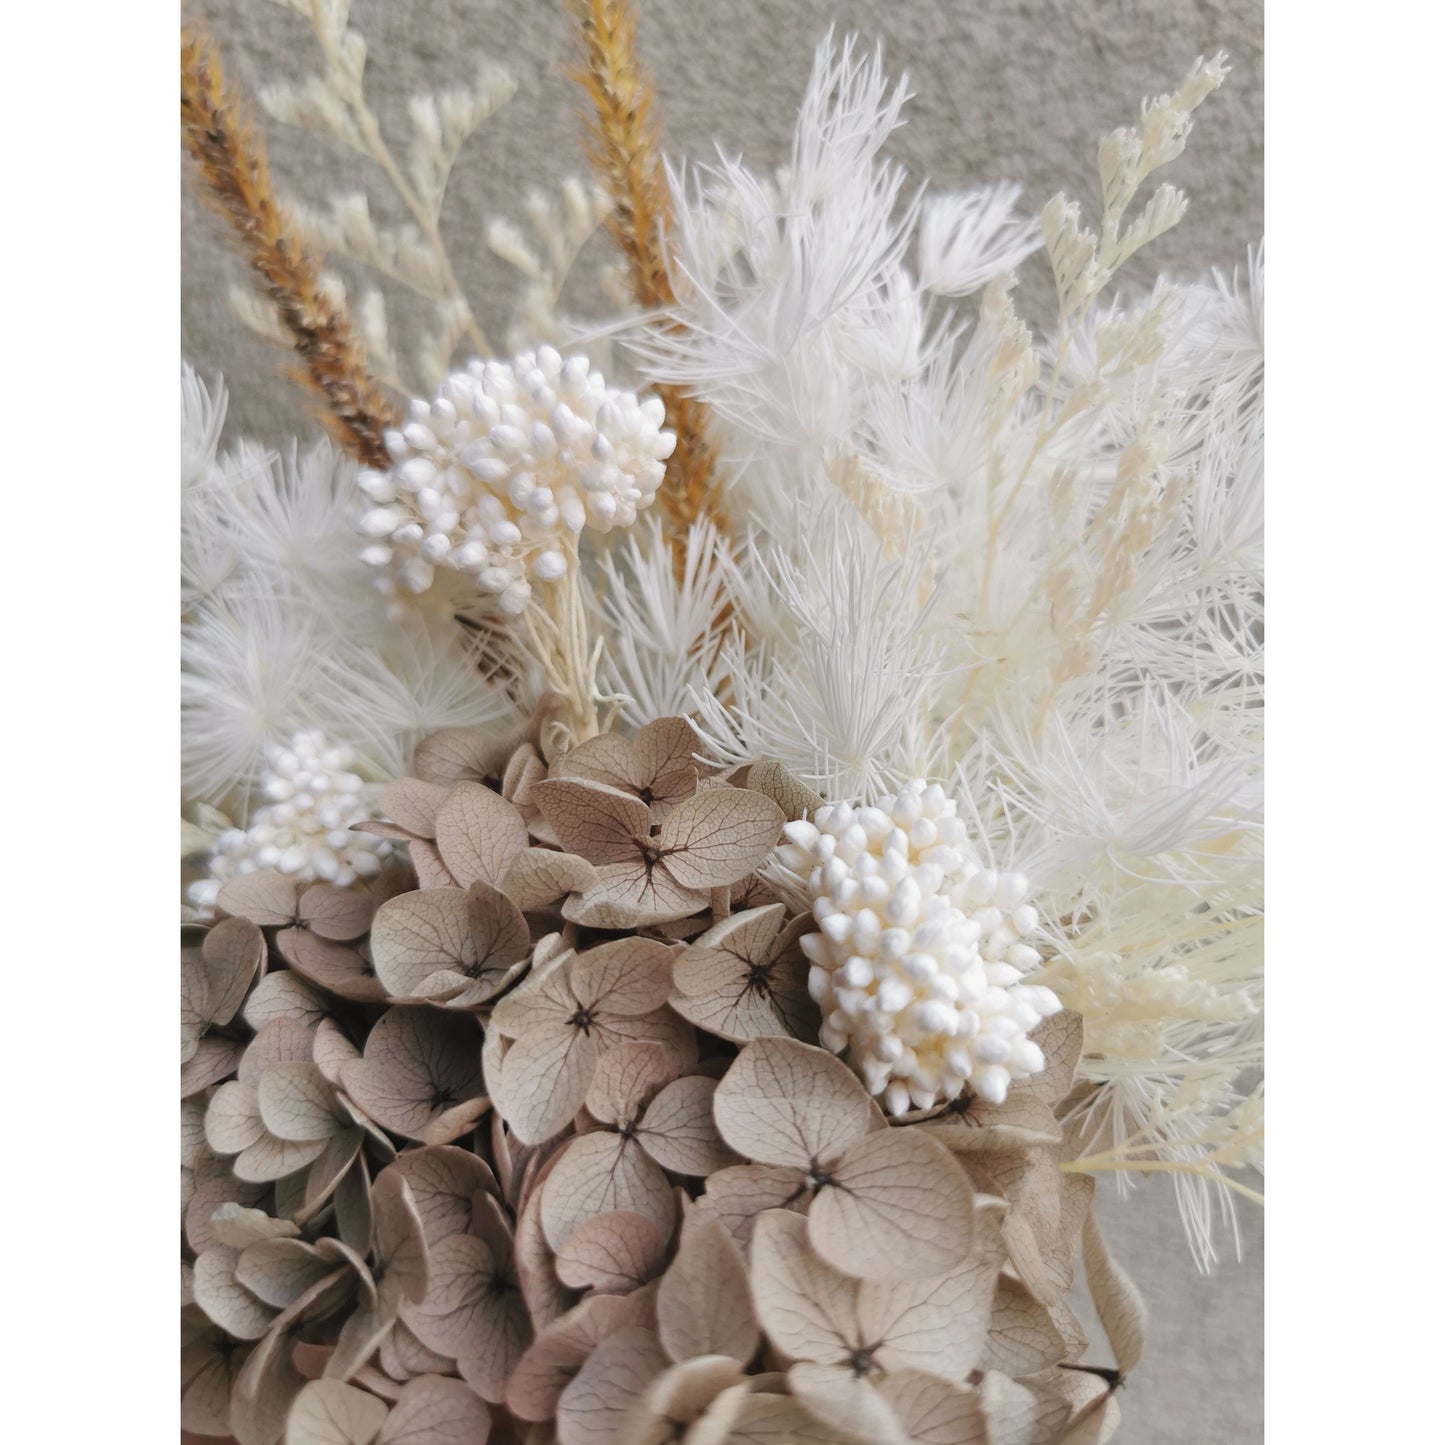 Neutral coloured dried & preserved flower arrangement. Photo shows a close up photo of the neutral coloured flowers